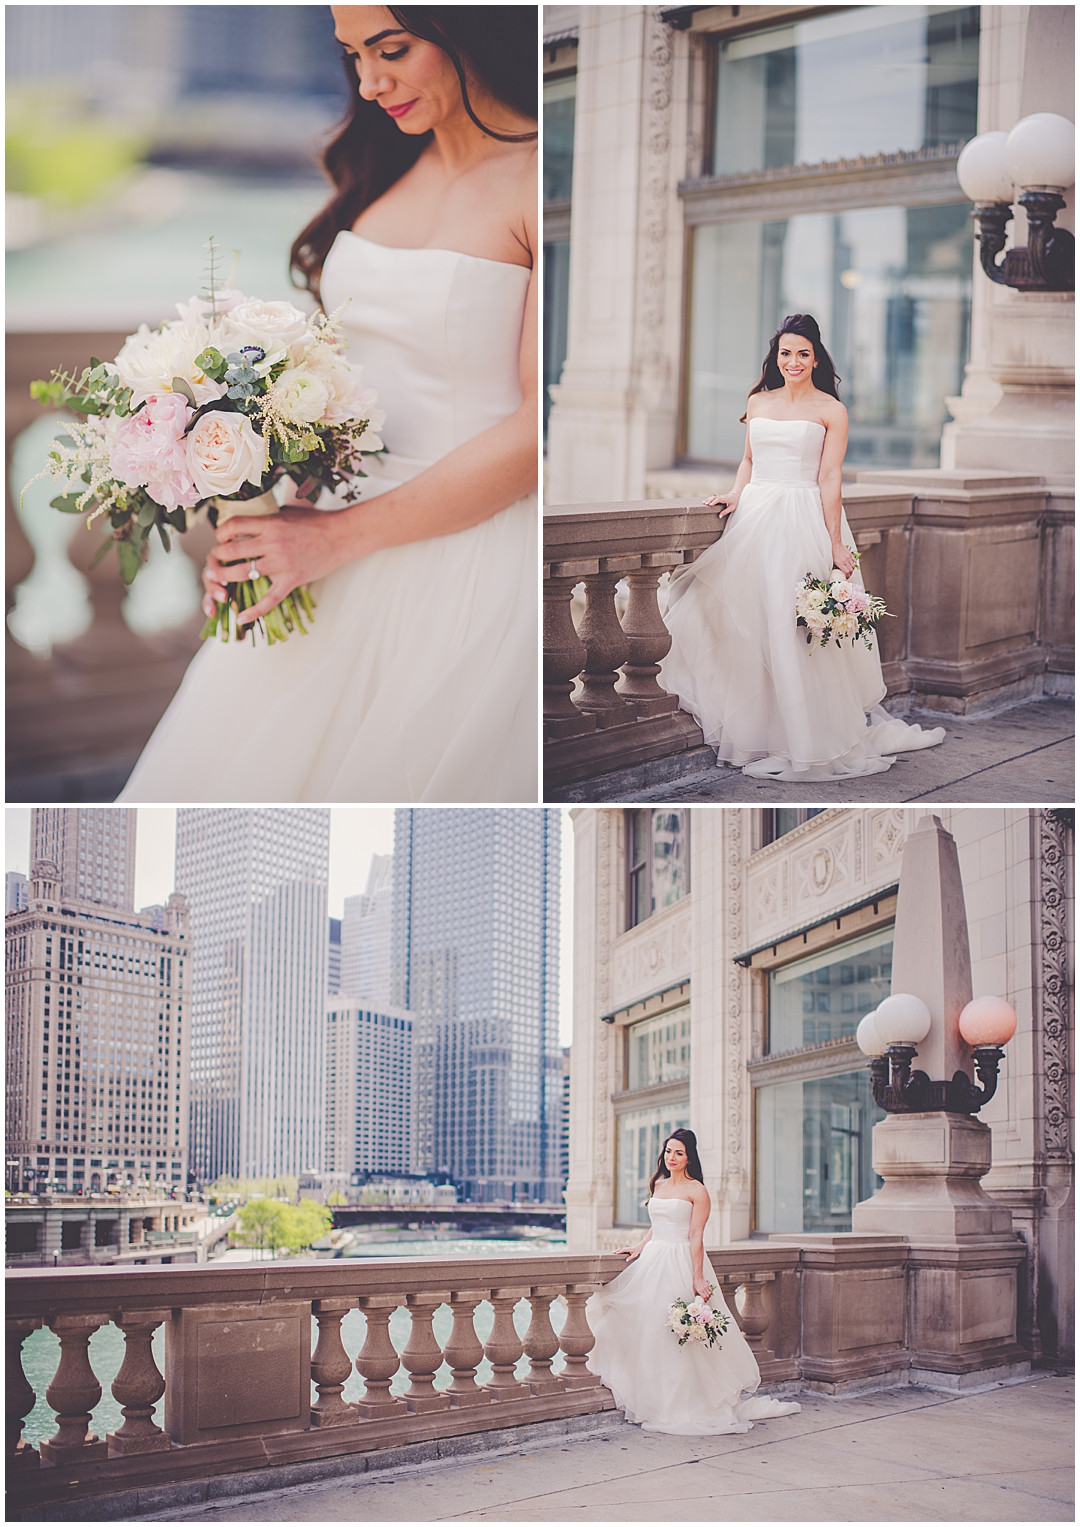 Wedding photos at the Wrigley Building Chicago - Romantic Blush & Gold Wedding Day at Room 1520 in Chicago, Illinois with Chicagoland Wedding Photographer Kara Evans Photographer